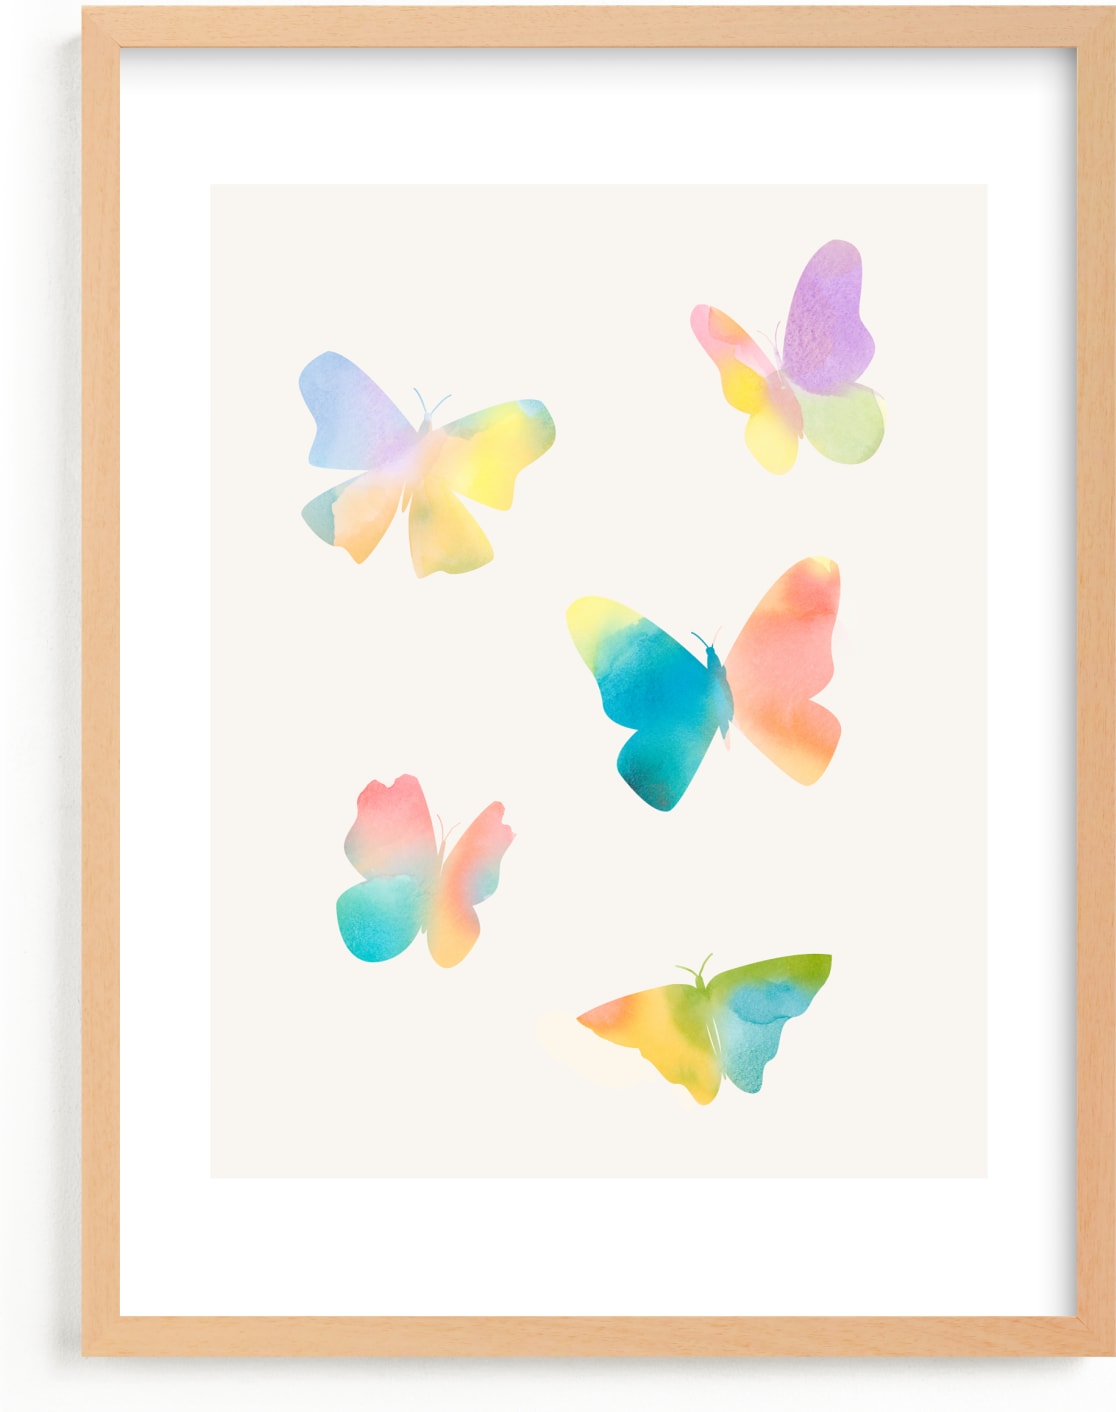 This is a blue, pink, green kids wall art by Lindsay Megahed called Watercolor butterflies.